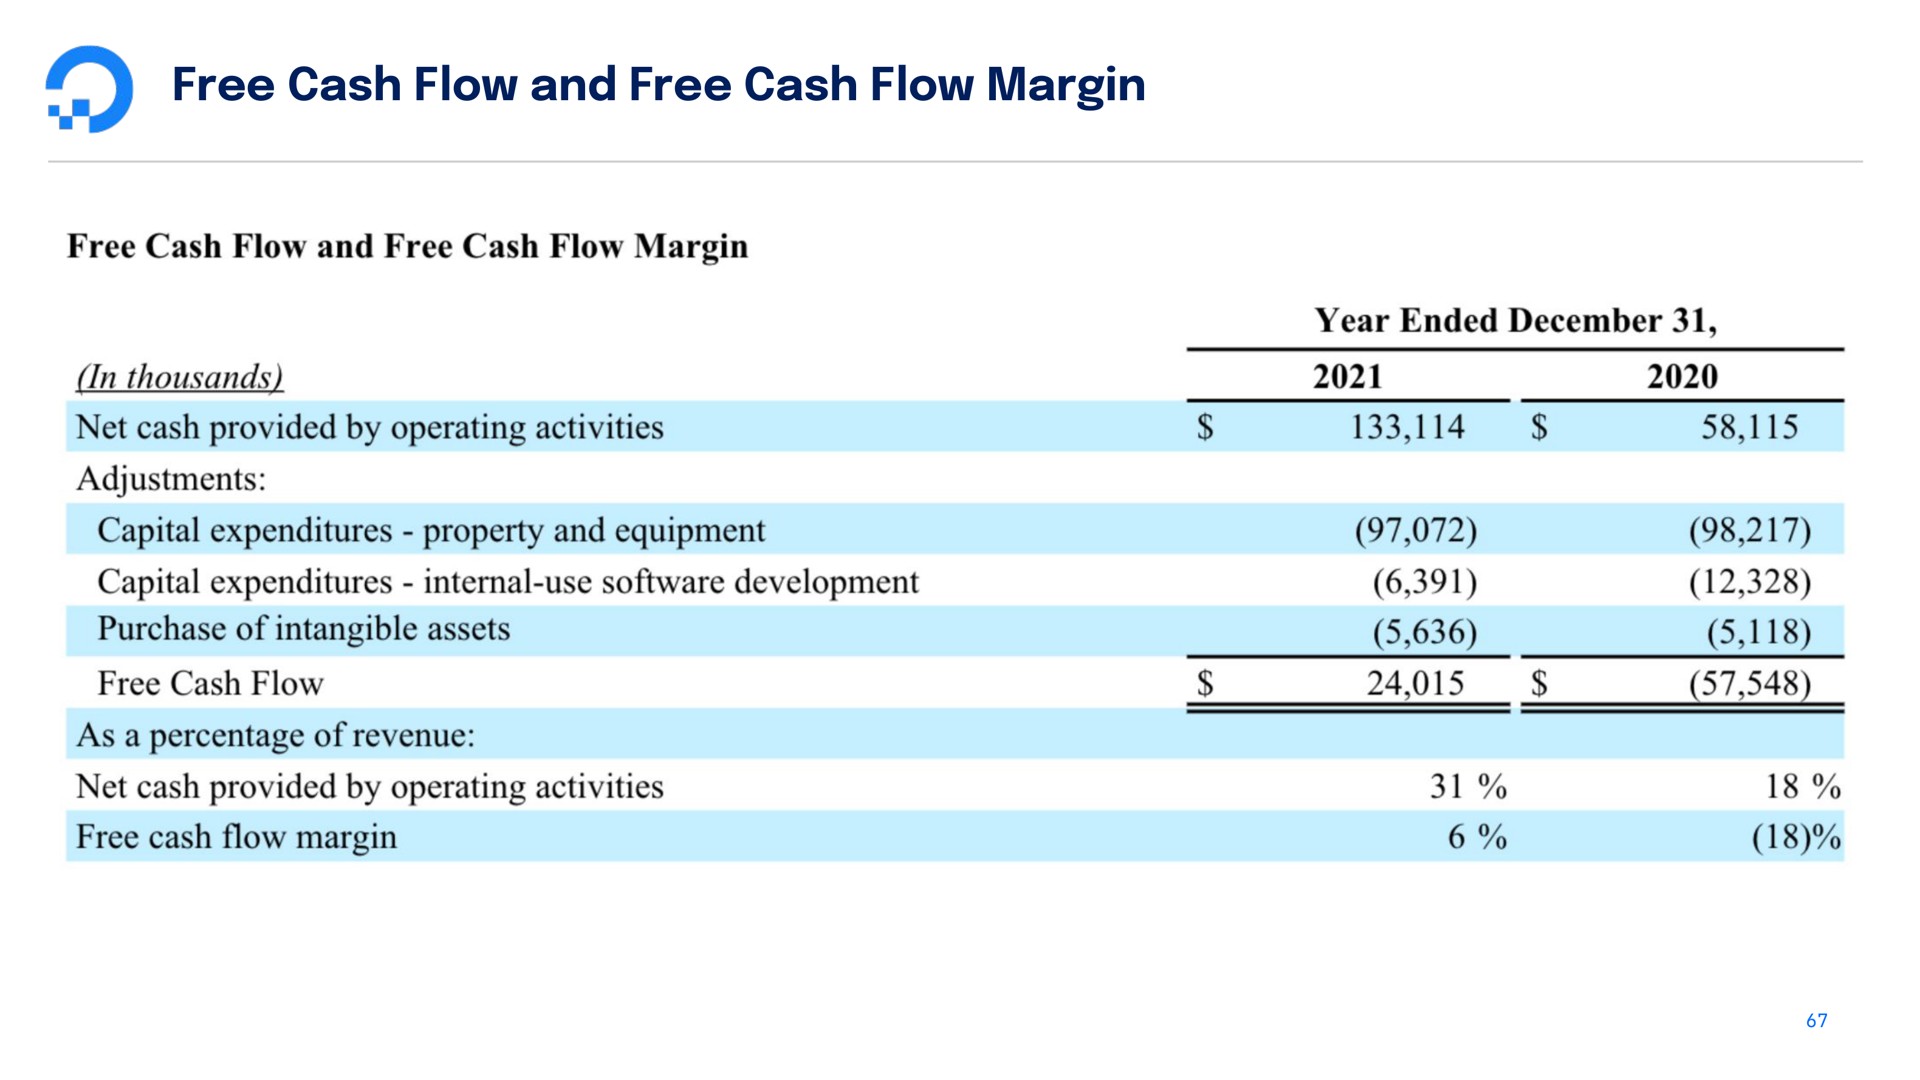 free cash flow and free cash flow margin free cash flow and free cash flow margin in thousands net cash provided by operating activities adjustments capital expenditures property and equipment capital expenditures internal use development purchase of intangible assets free cash flow as a percentage of revenue net cash provided by operating activities free cash flow margin year ended | DigitalOcean